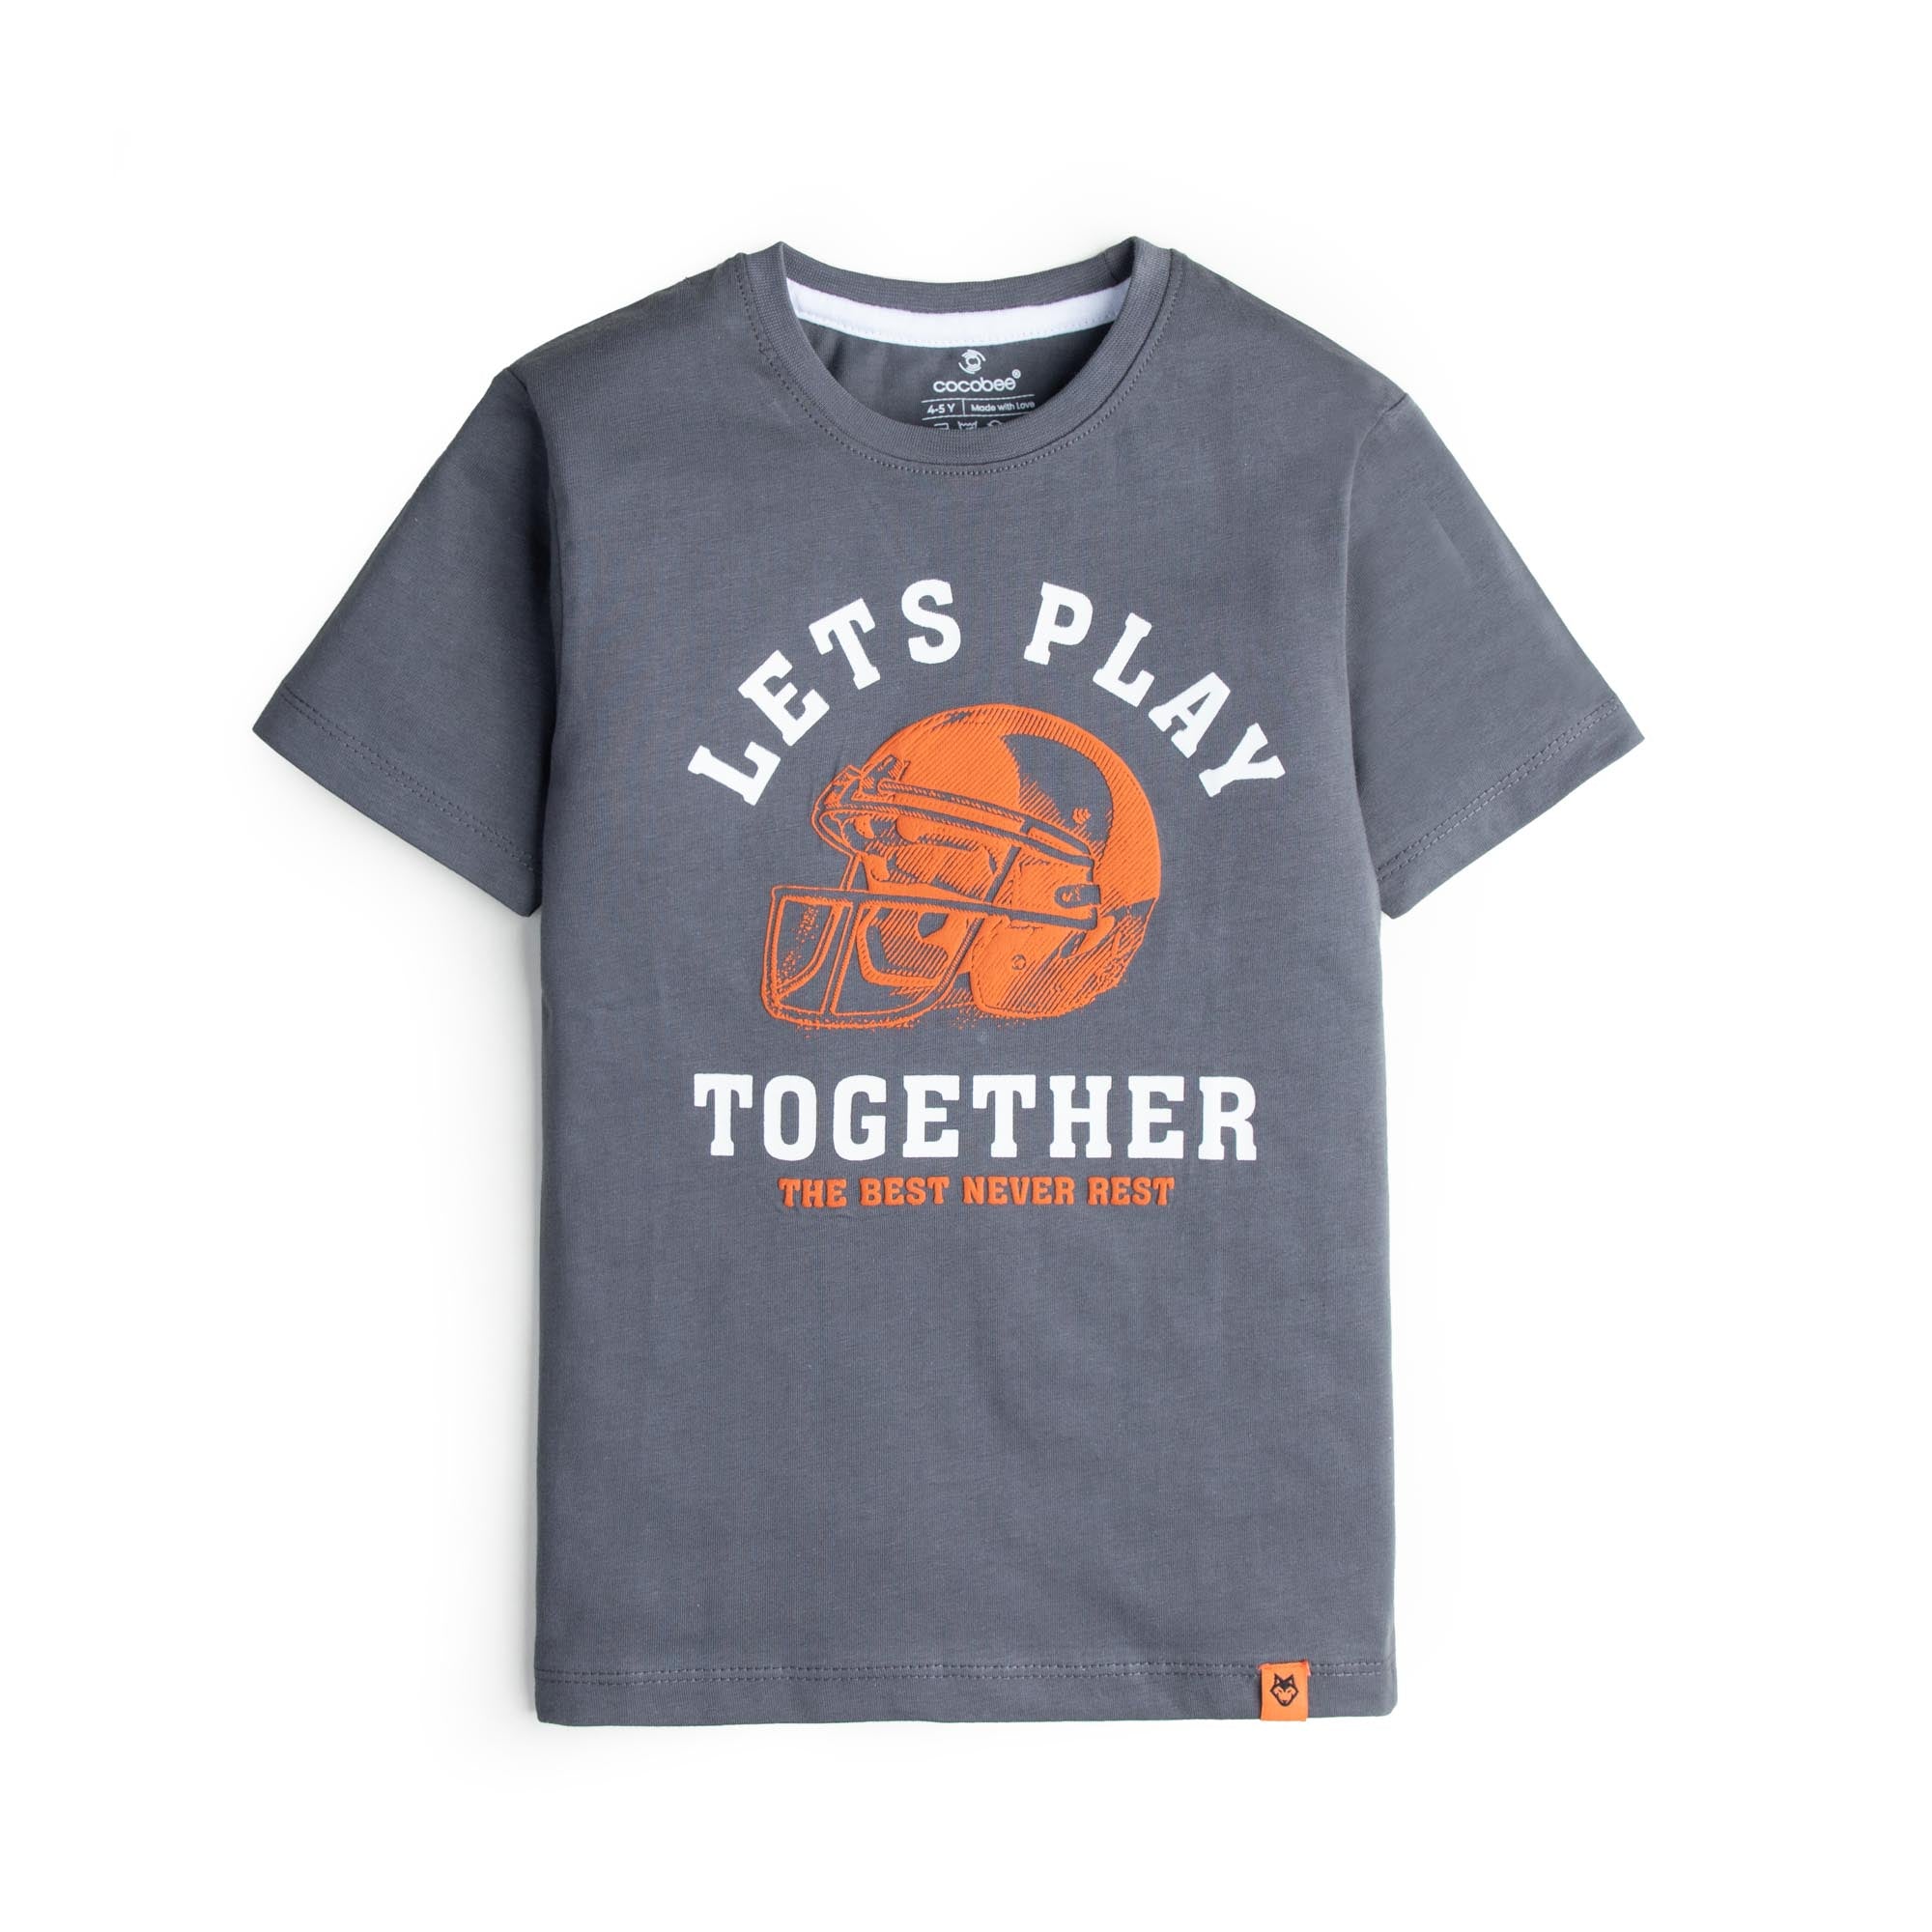 Play Together T-shirt